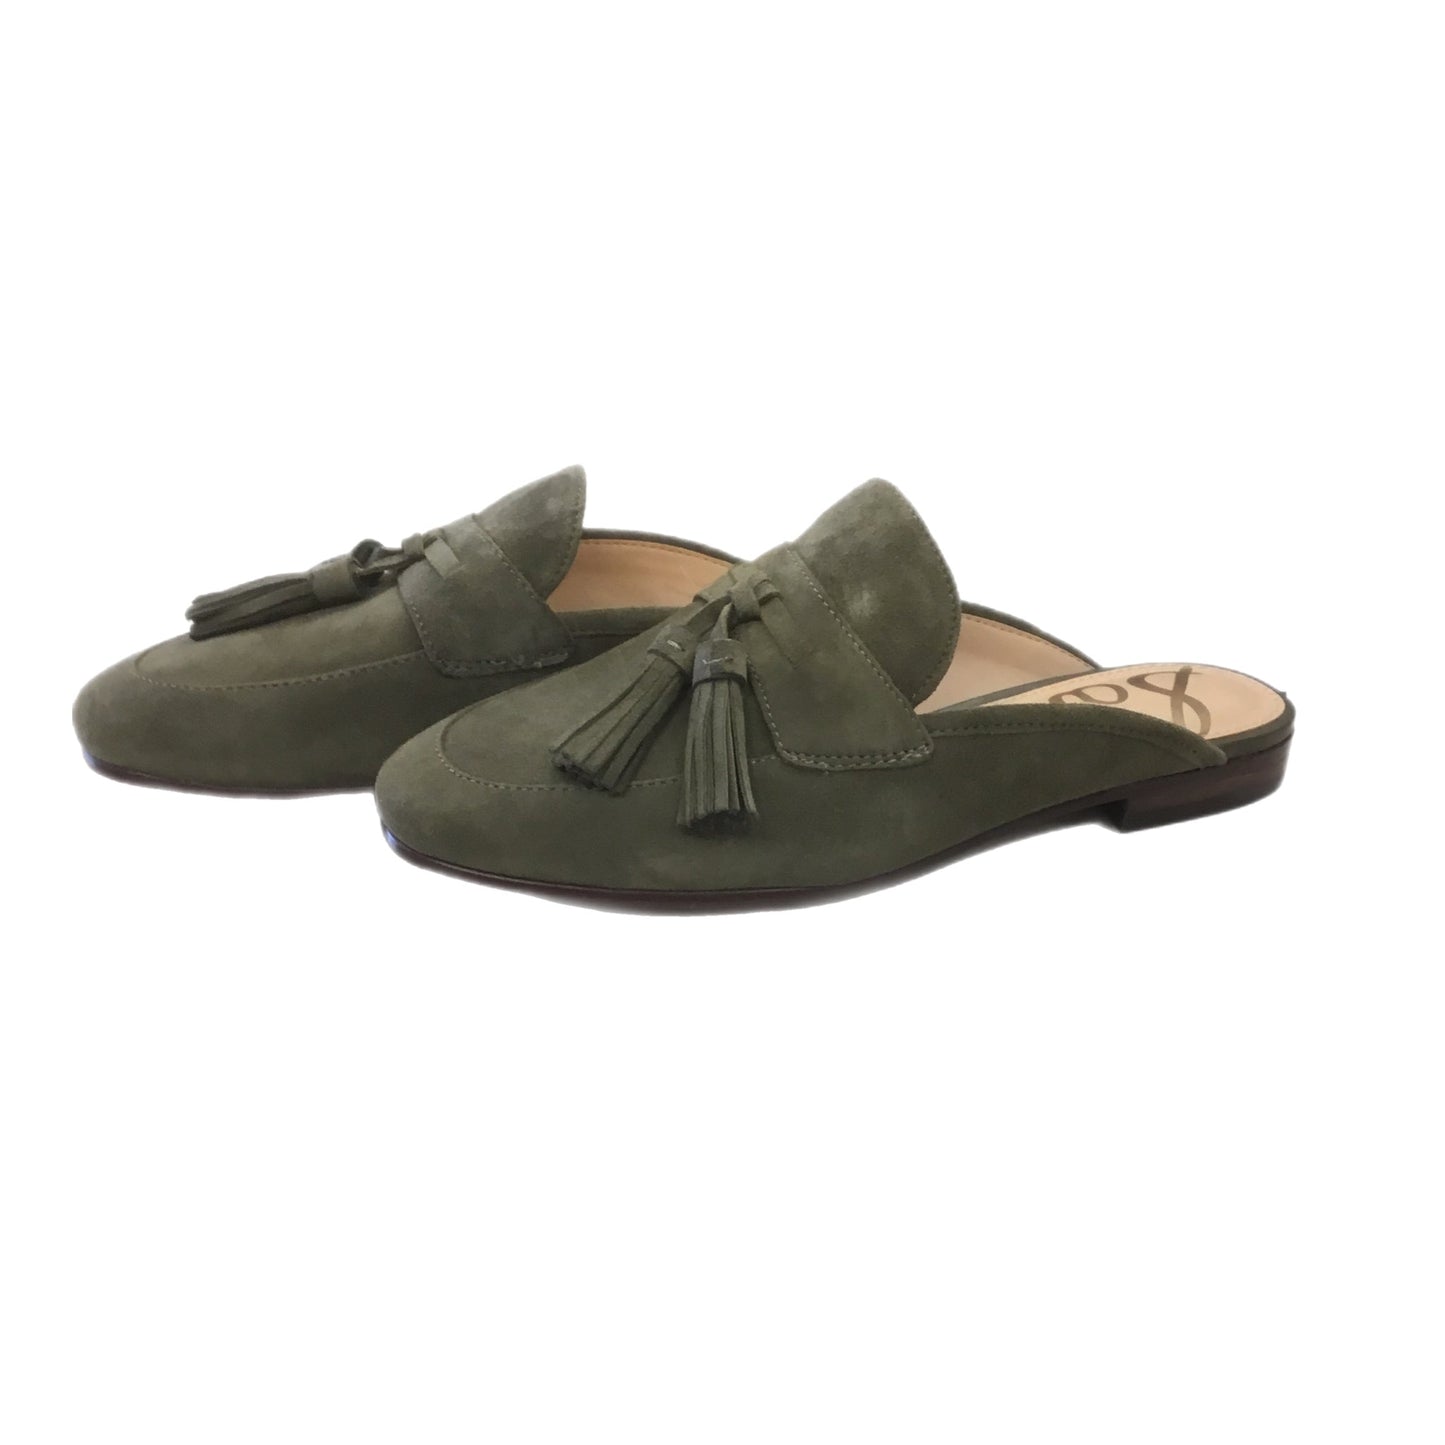 Shoes Flats Loafer Oxford By Sam Edelman  Size: 6